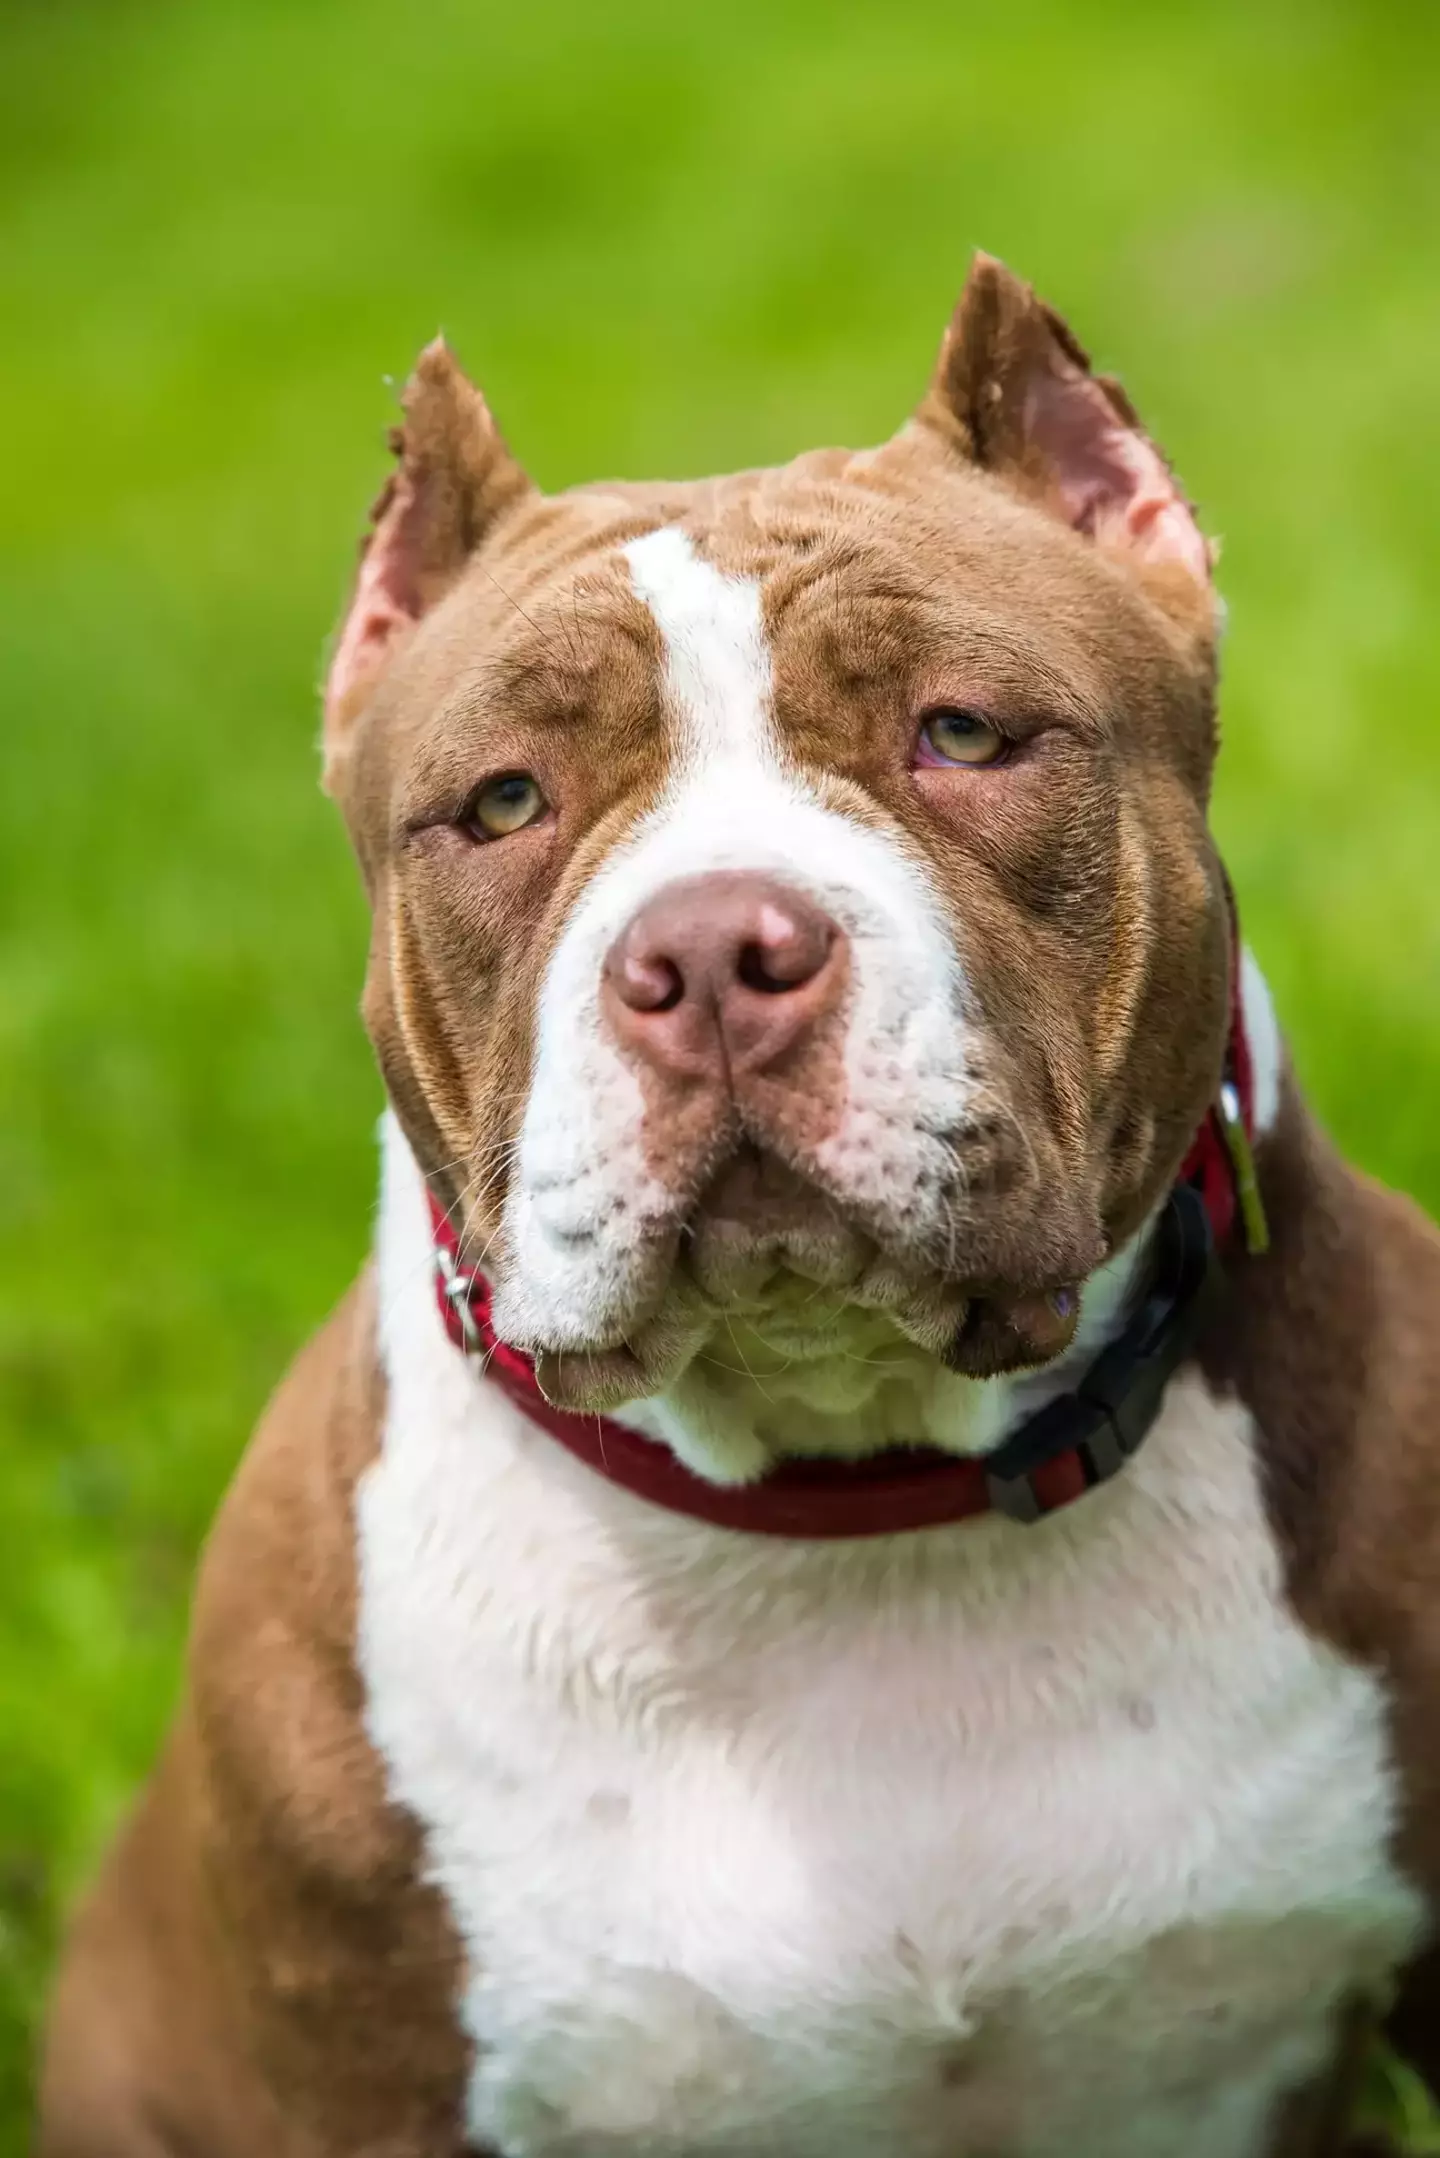 XL bullys are set to be banned by the end of this year.